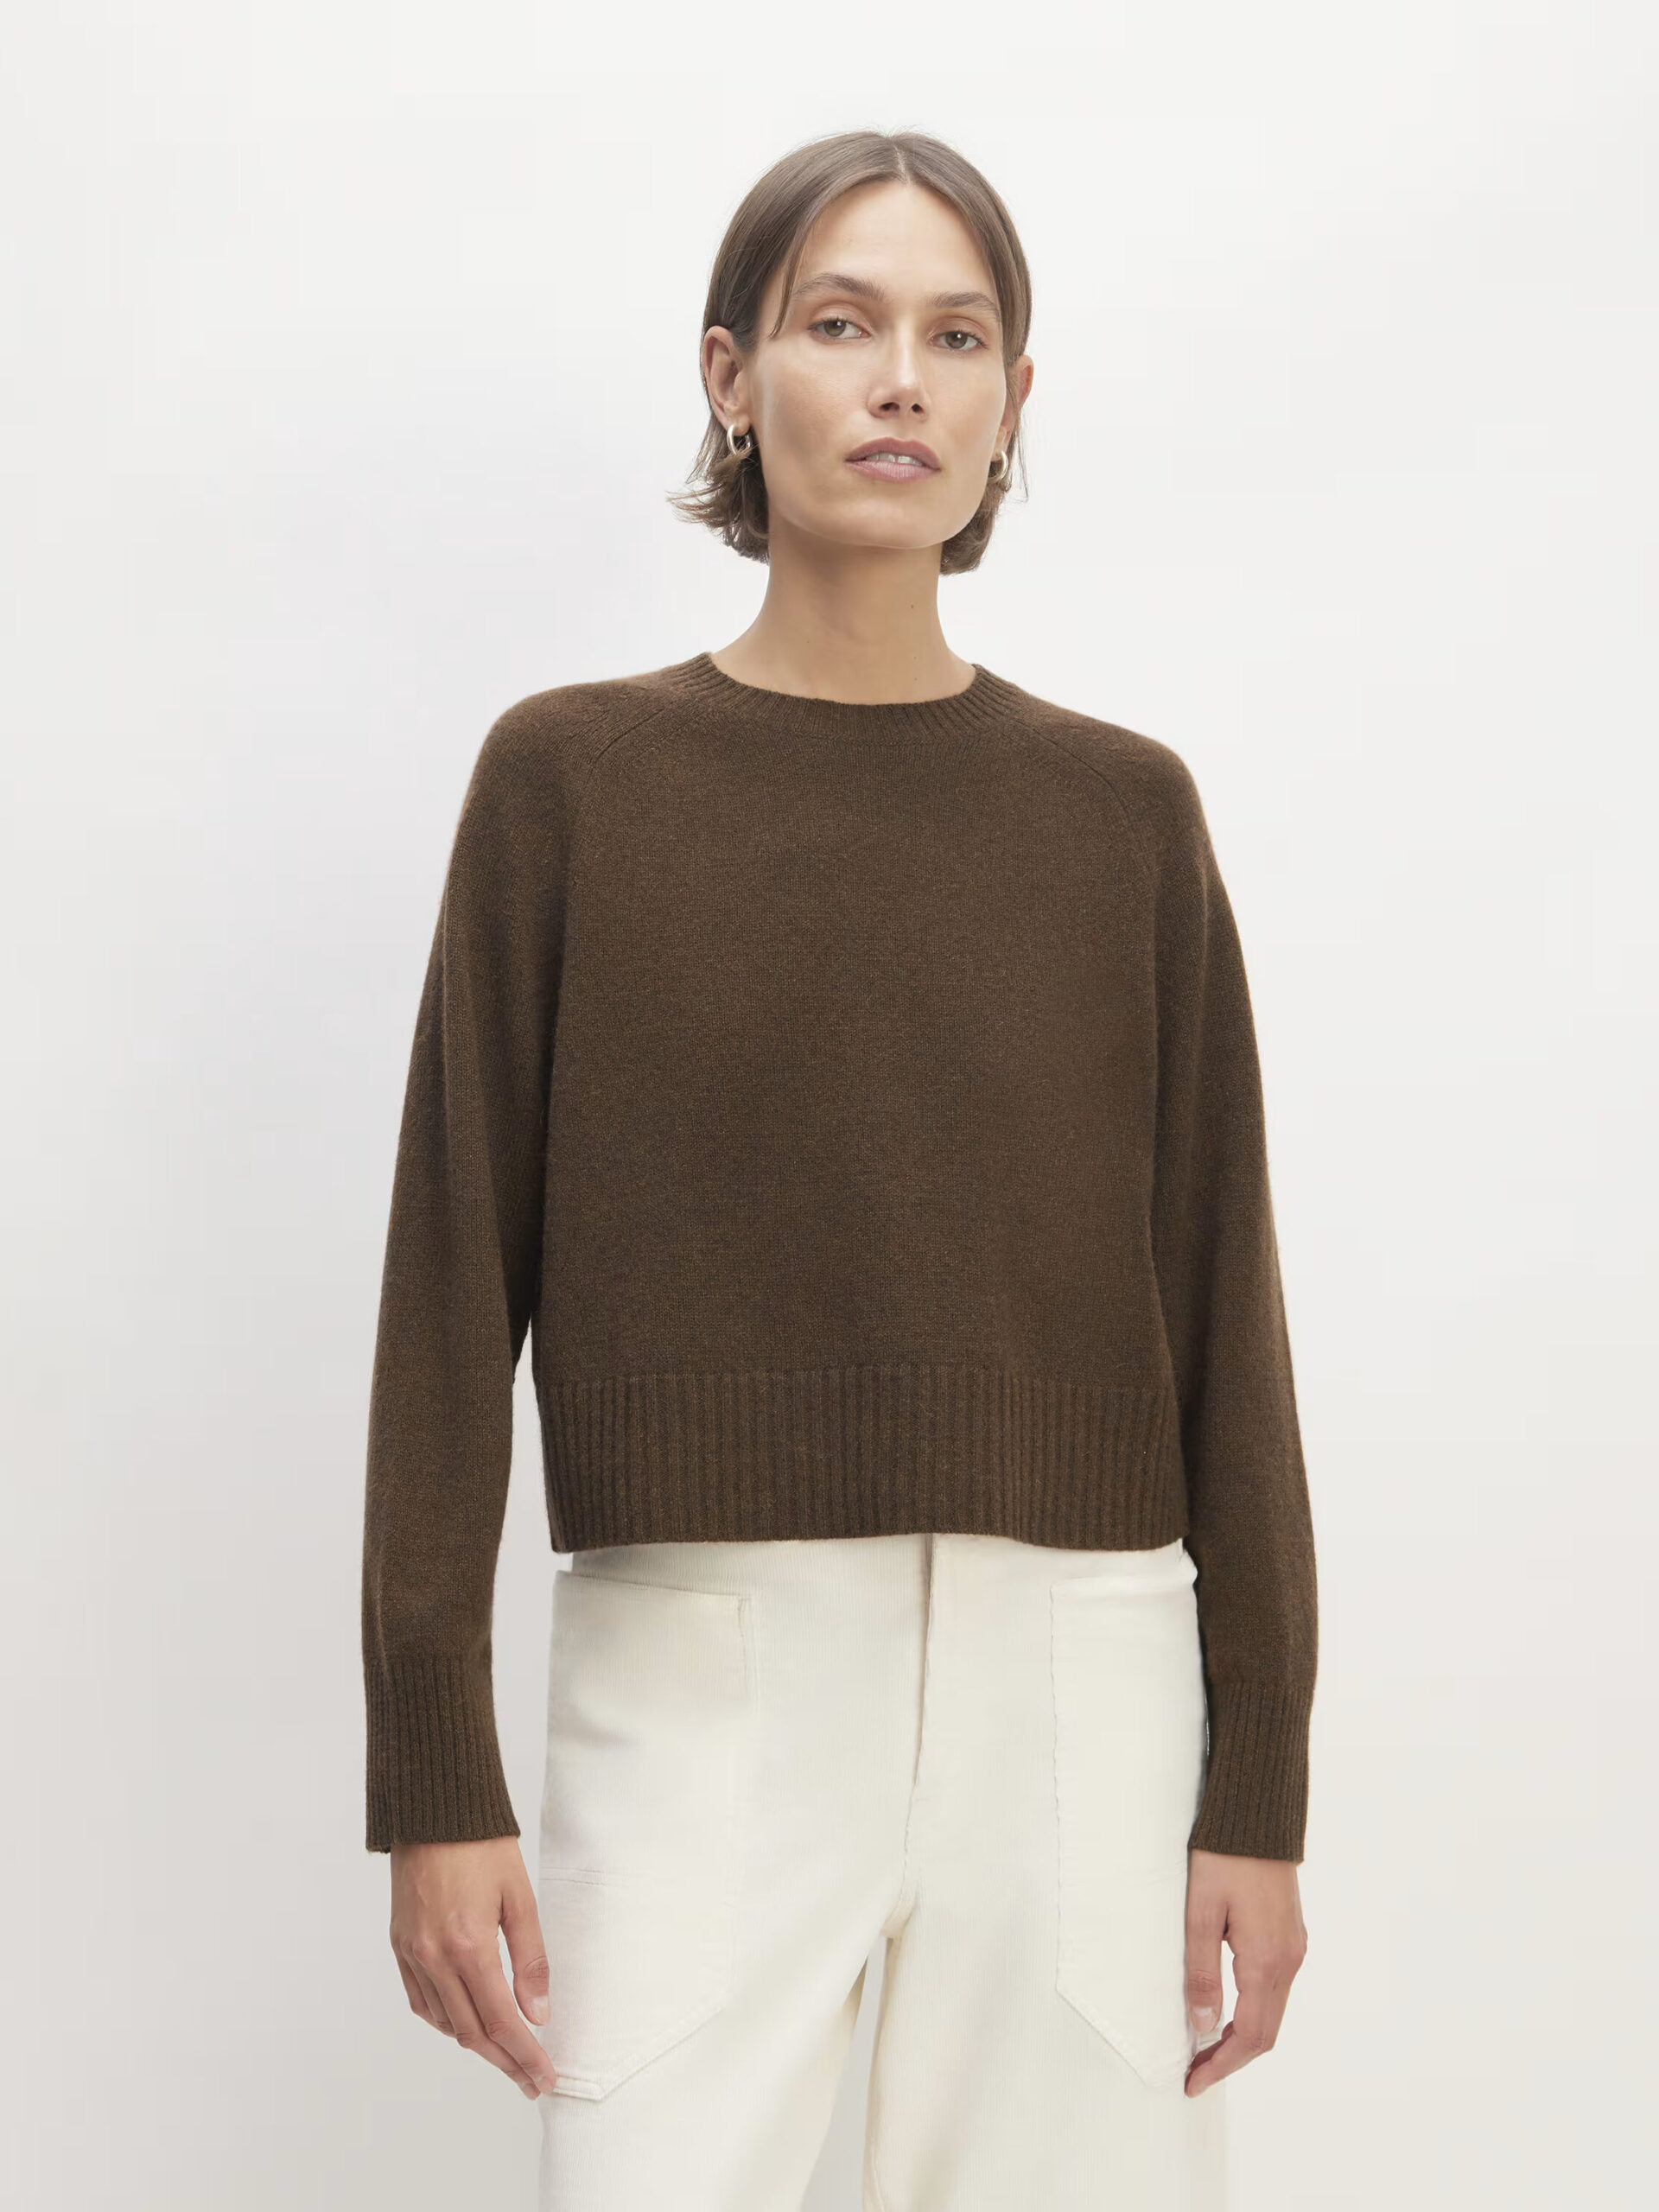 A model wearing a brown boxy knit sweater by Everlane.